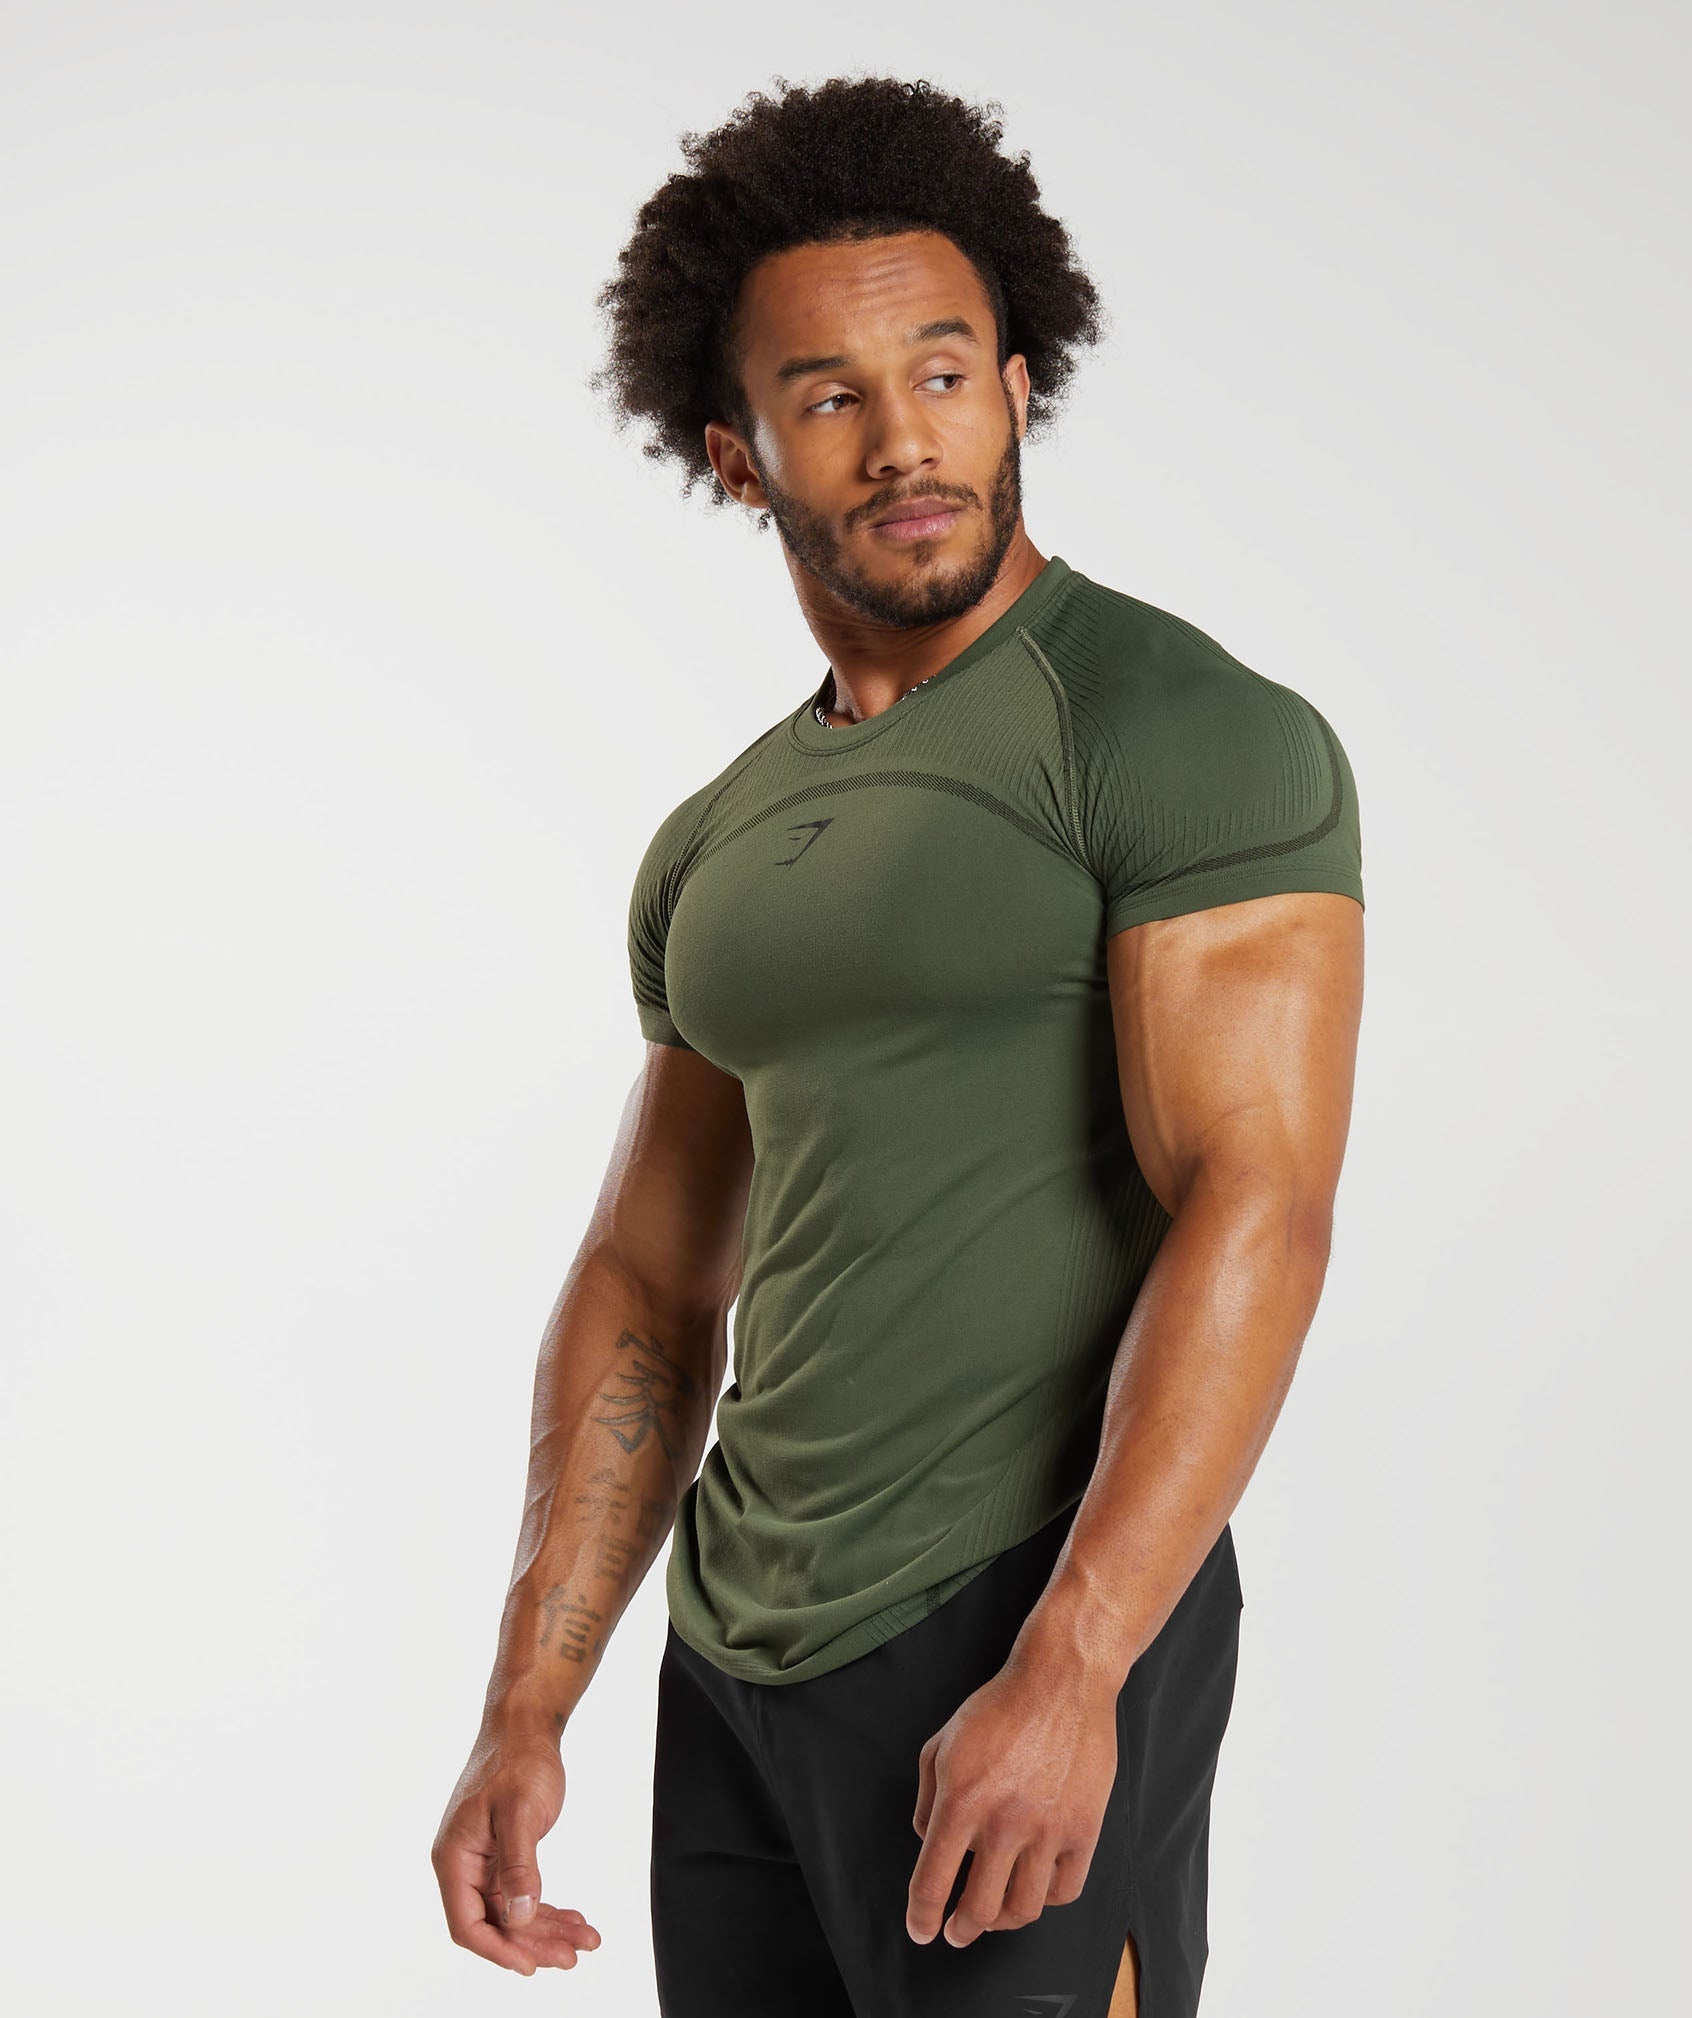 Seamless SINCH SMOOTH INSPIRE T-SHIRT